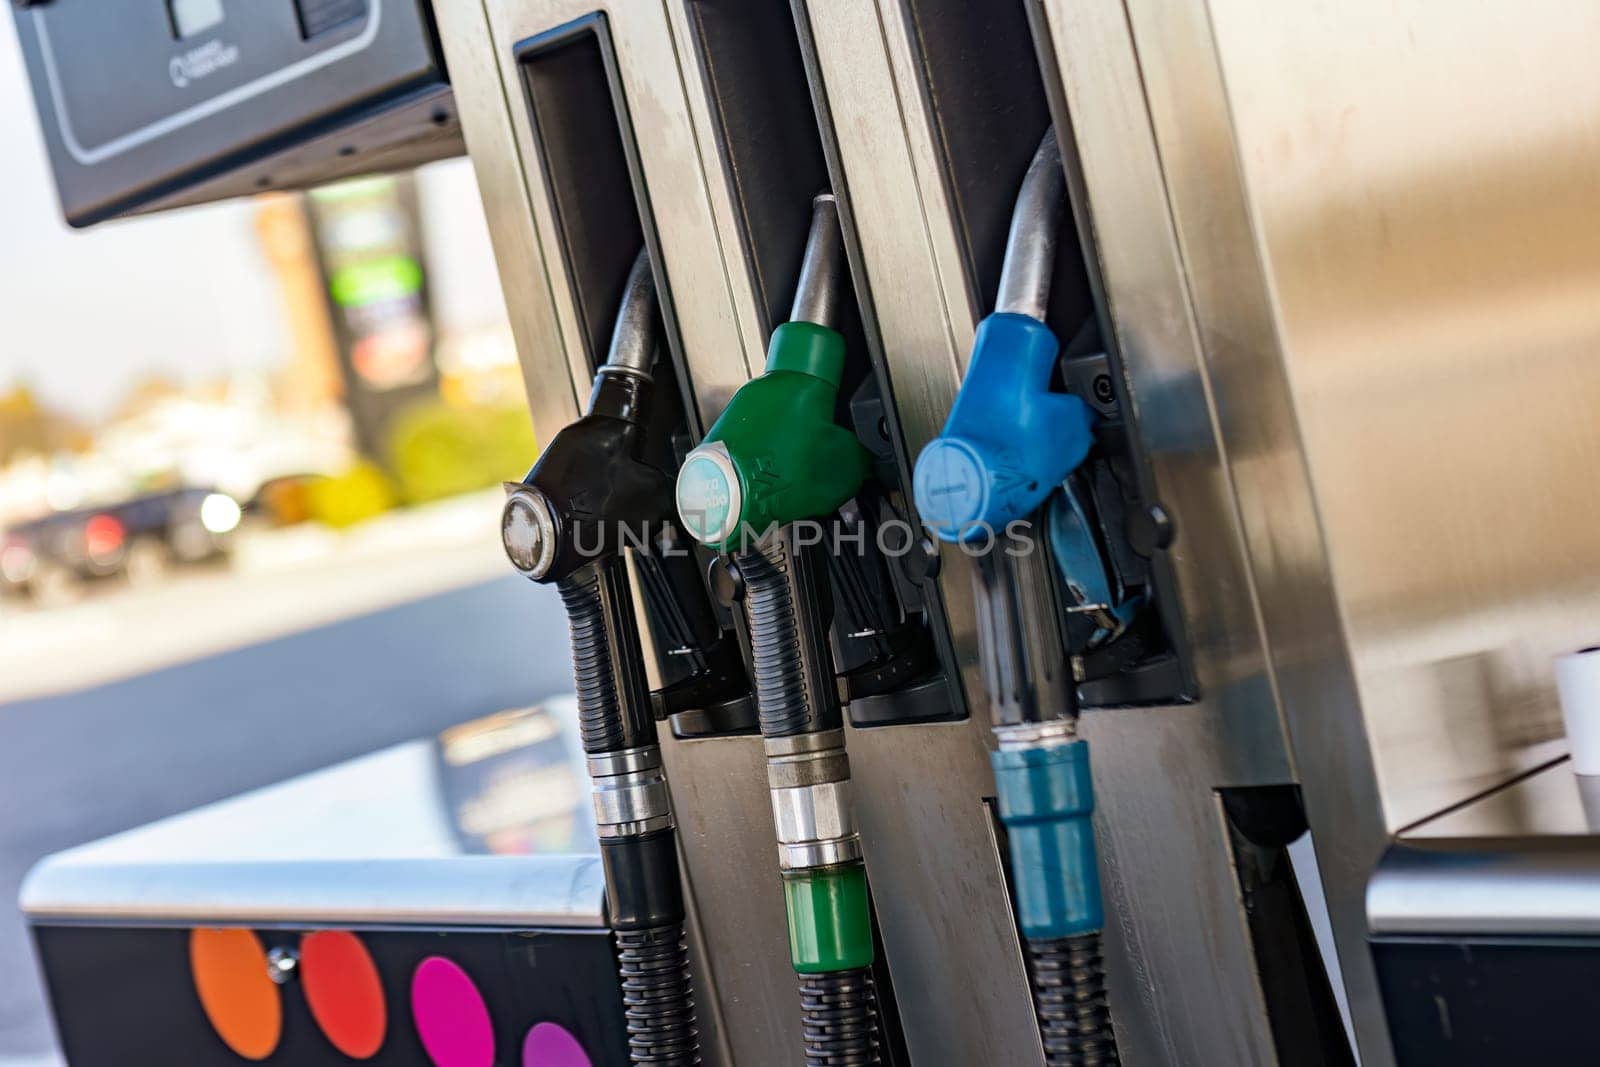 Fuel Price Surge at Gas Station by pippocarlot